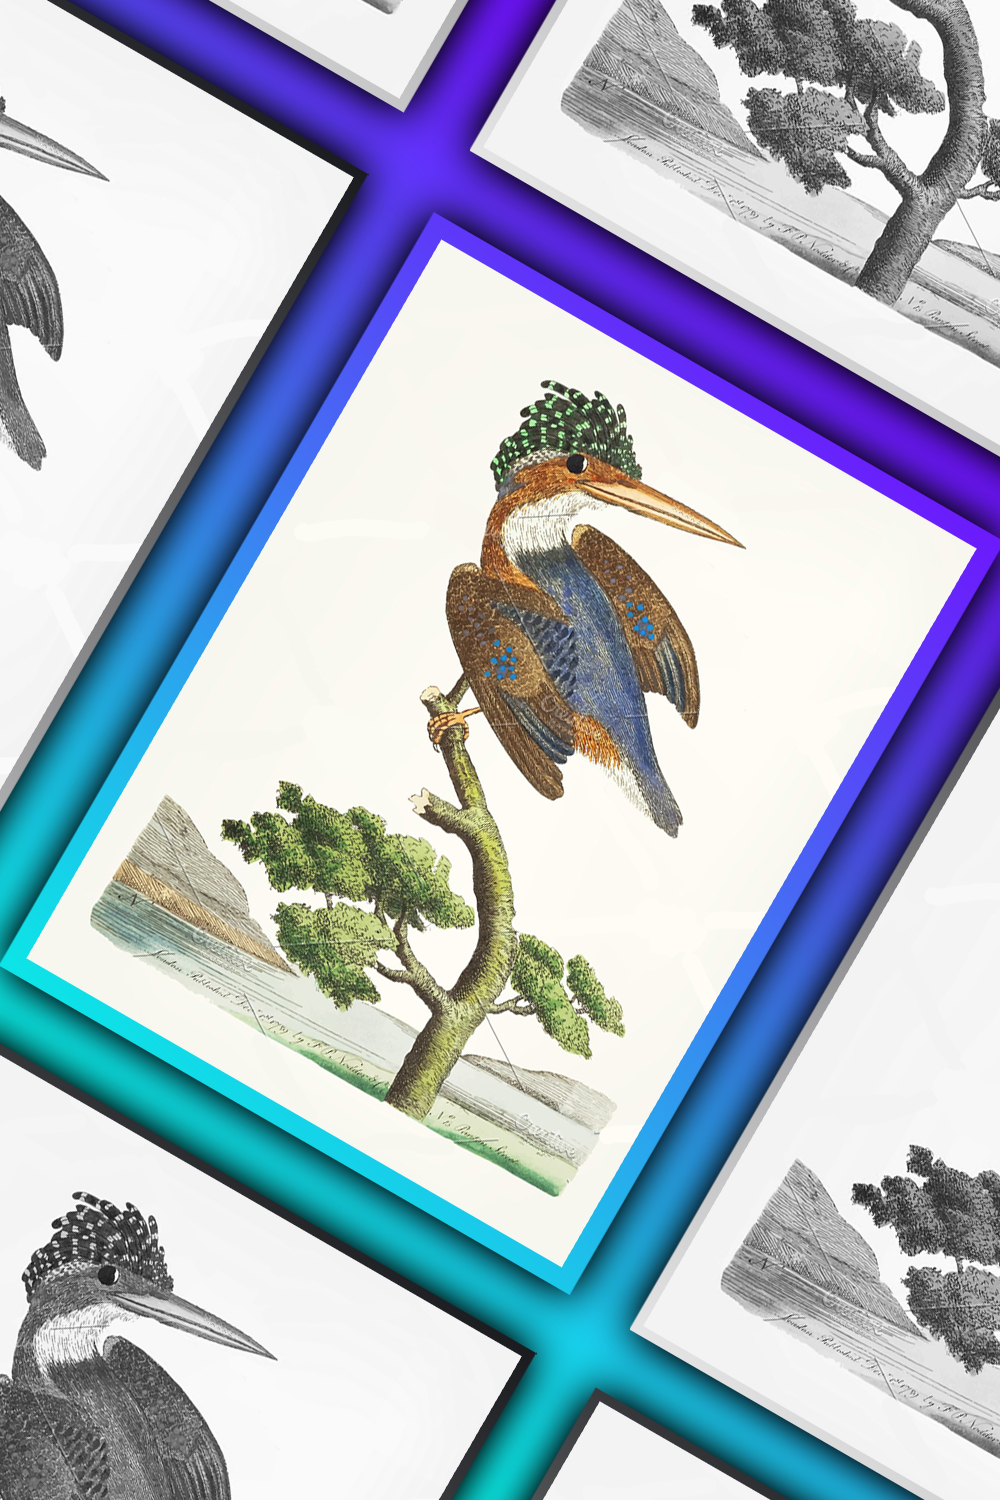 Illustrations hand drawn crested kingfisher of pinterest.